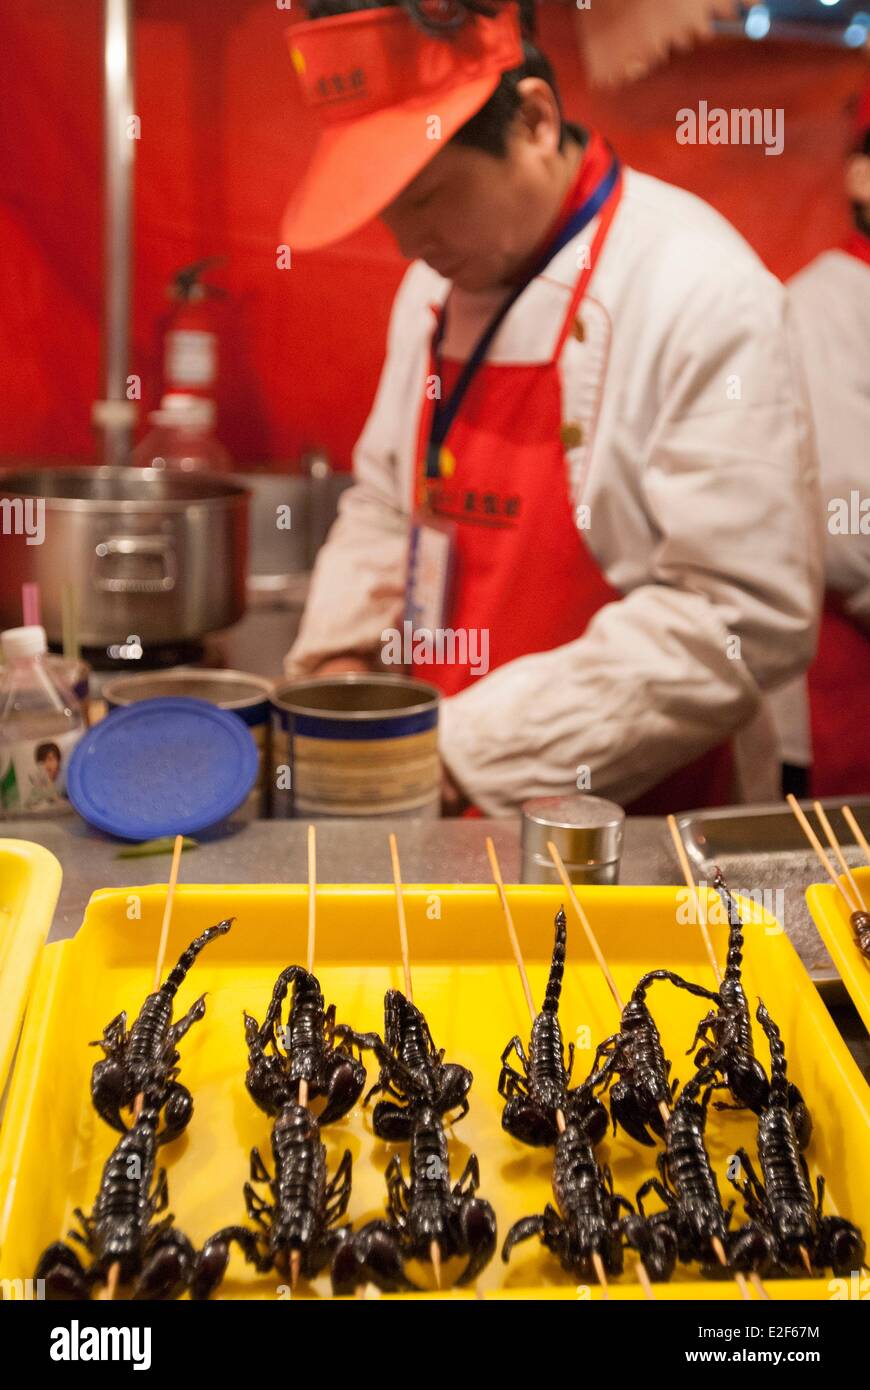 China, Beijing, the insects market, grilled scorpions Stock Photo